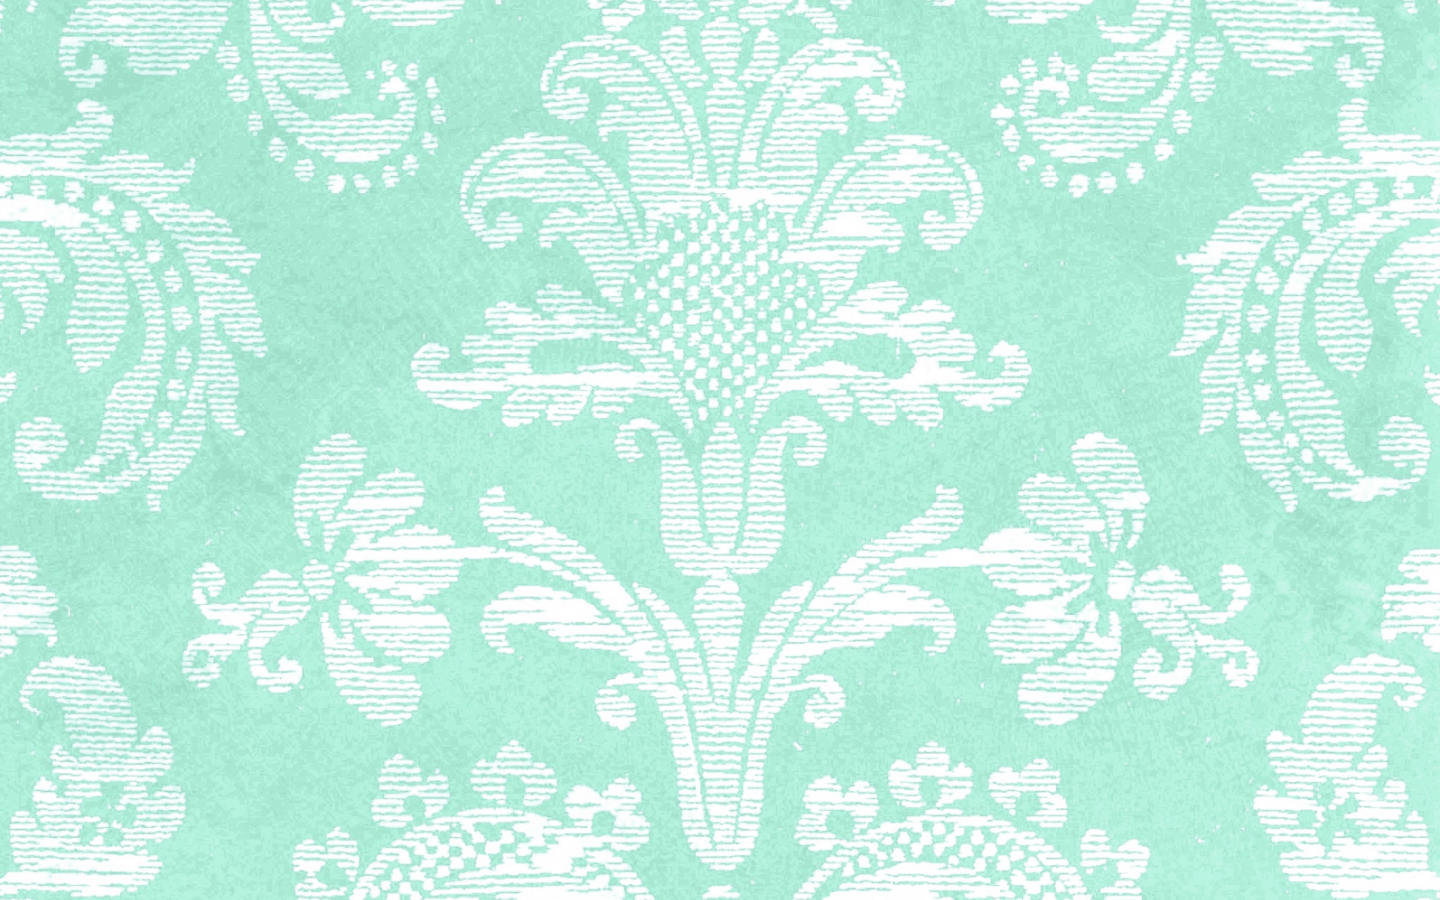 mint and pink color wallpaper